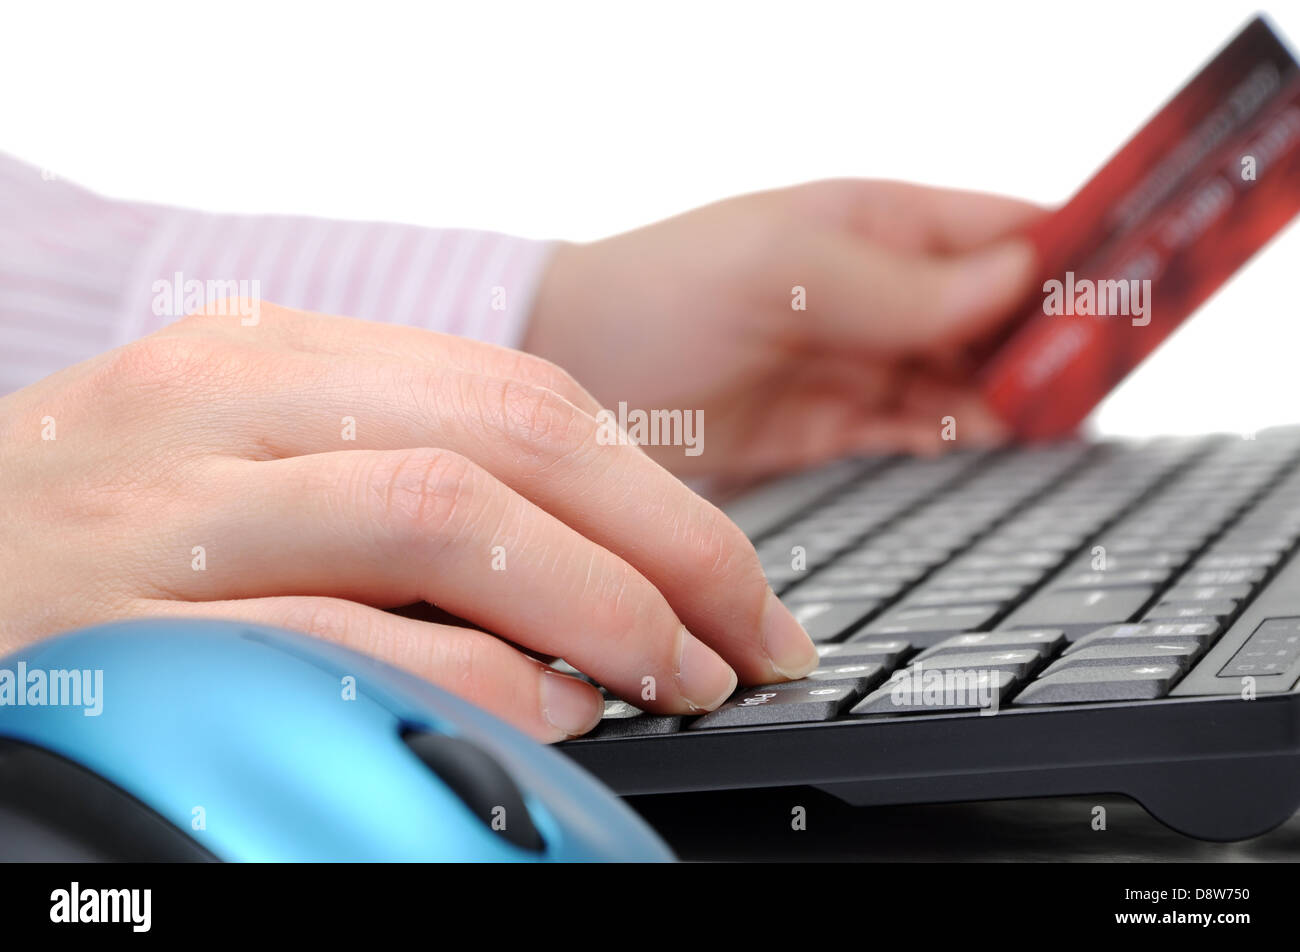 On-line shopping concept Stock Photo